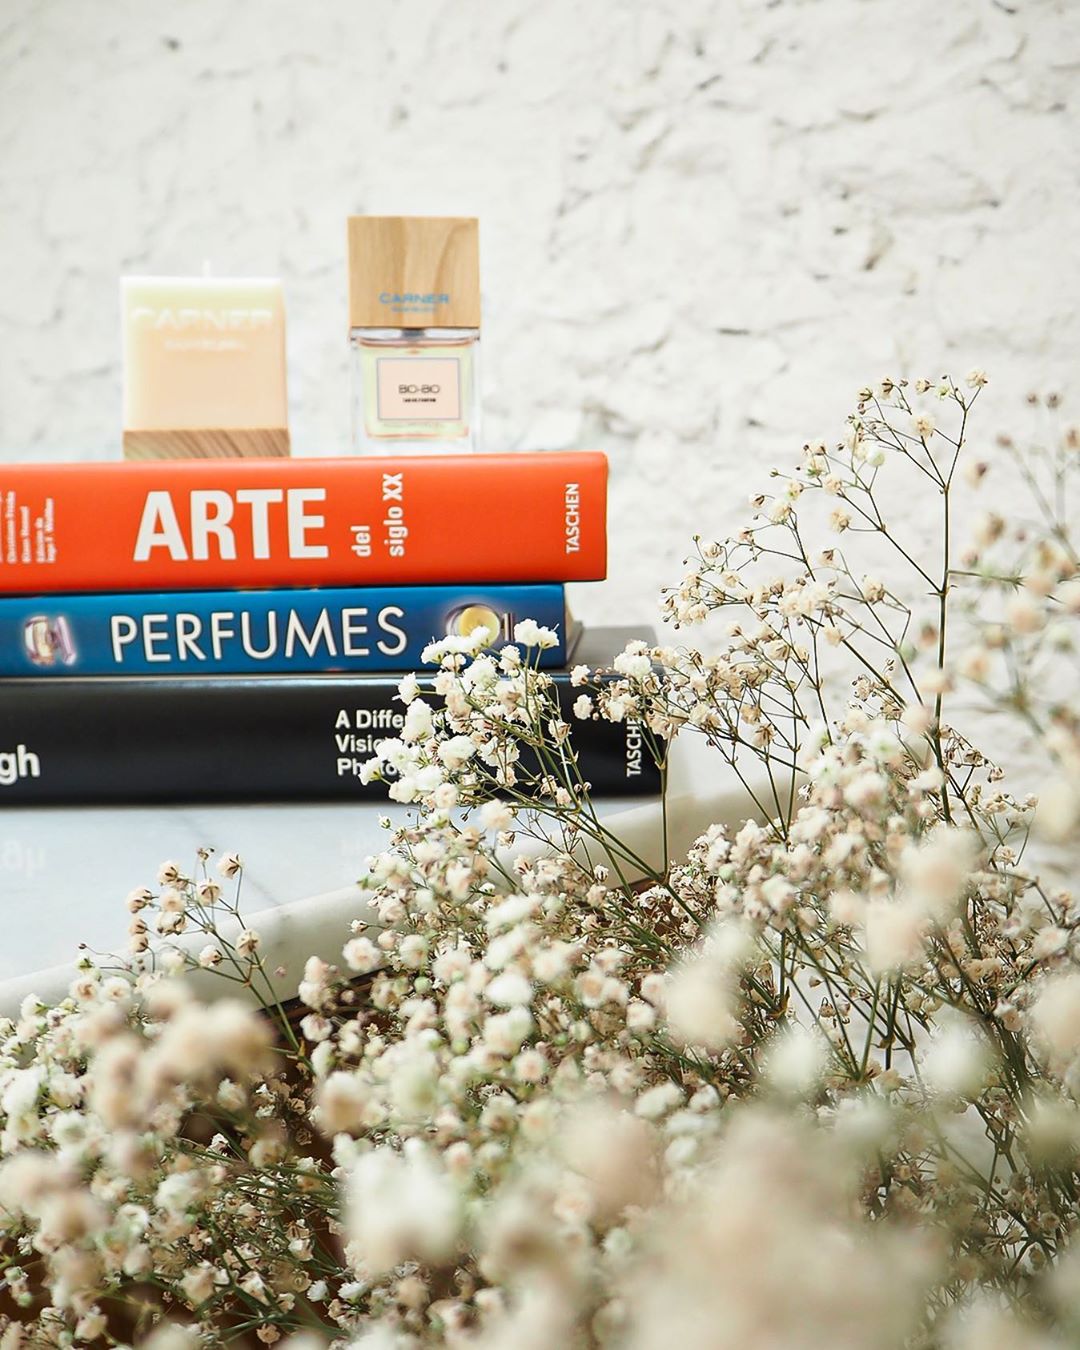 CARNER BARCELONA • Perfumes - Bo-Bo, an ancient folkloric dance is just as it sounds — a lively and celebratory custom that still today in modern times transmits the festive Mediterranean spirit 🍊

#b...